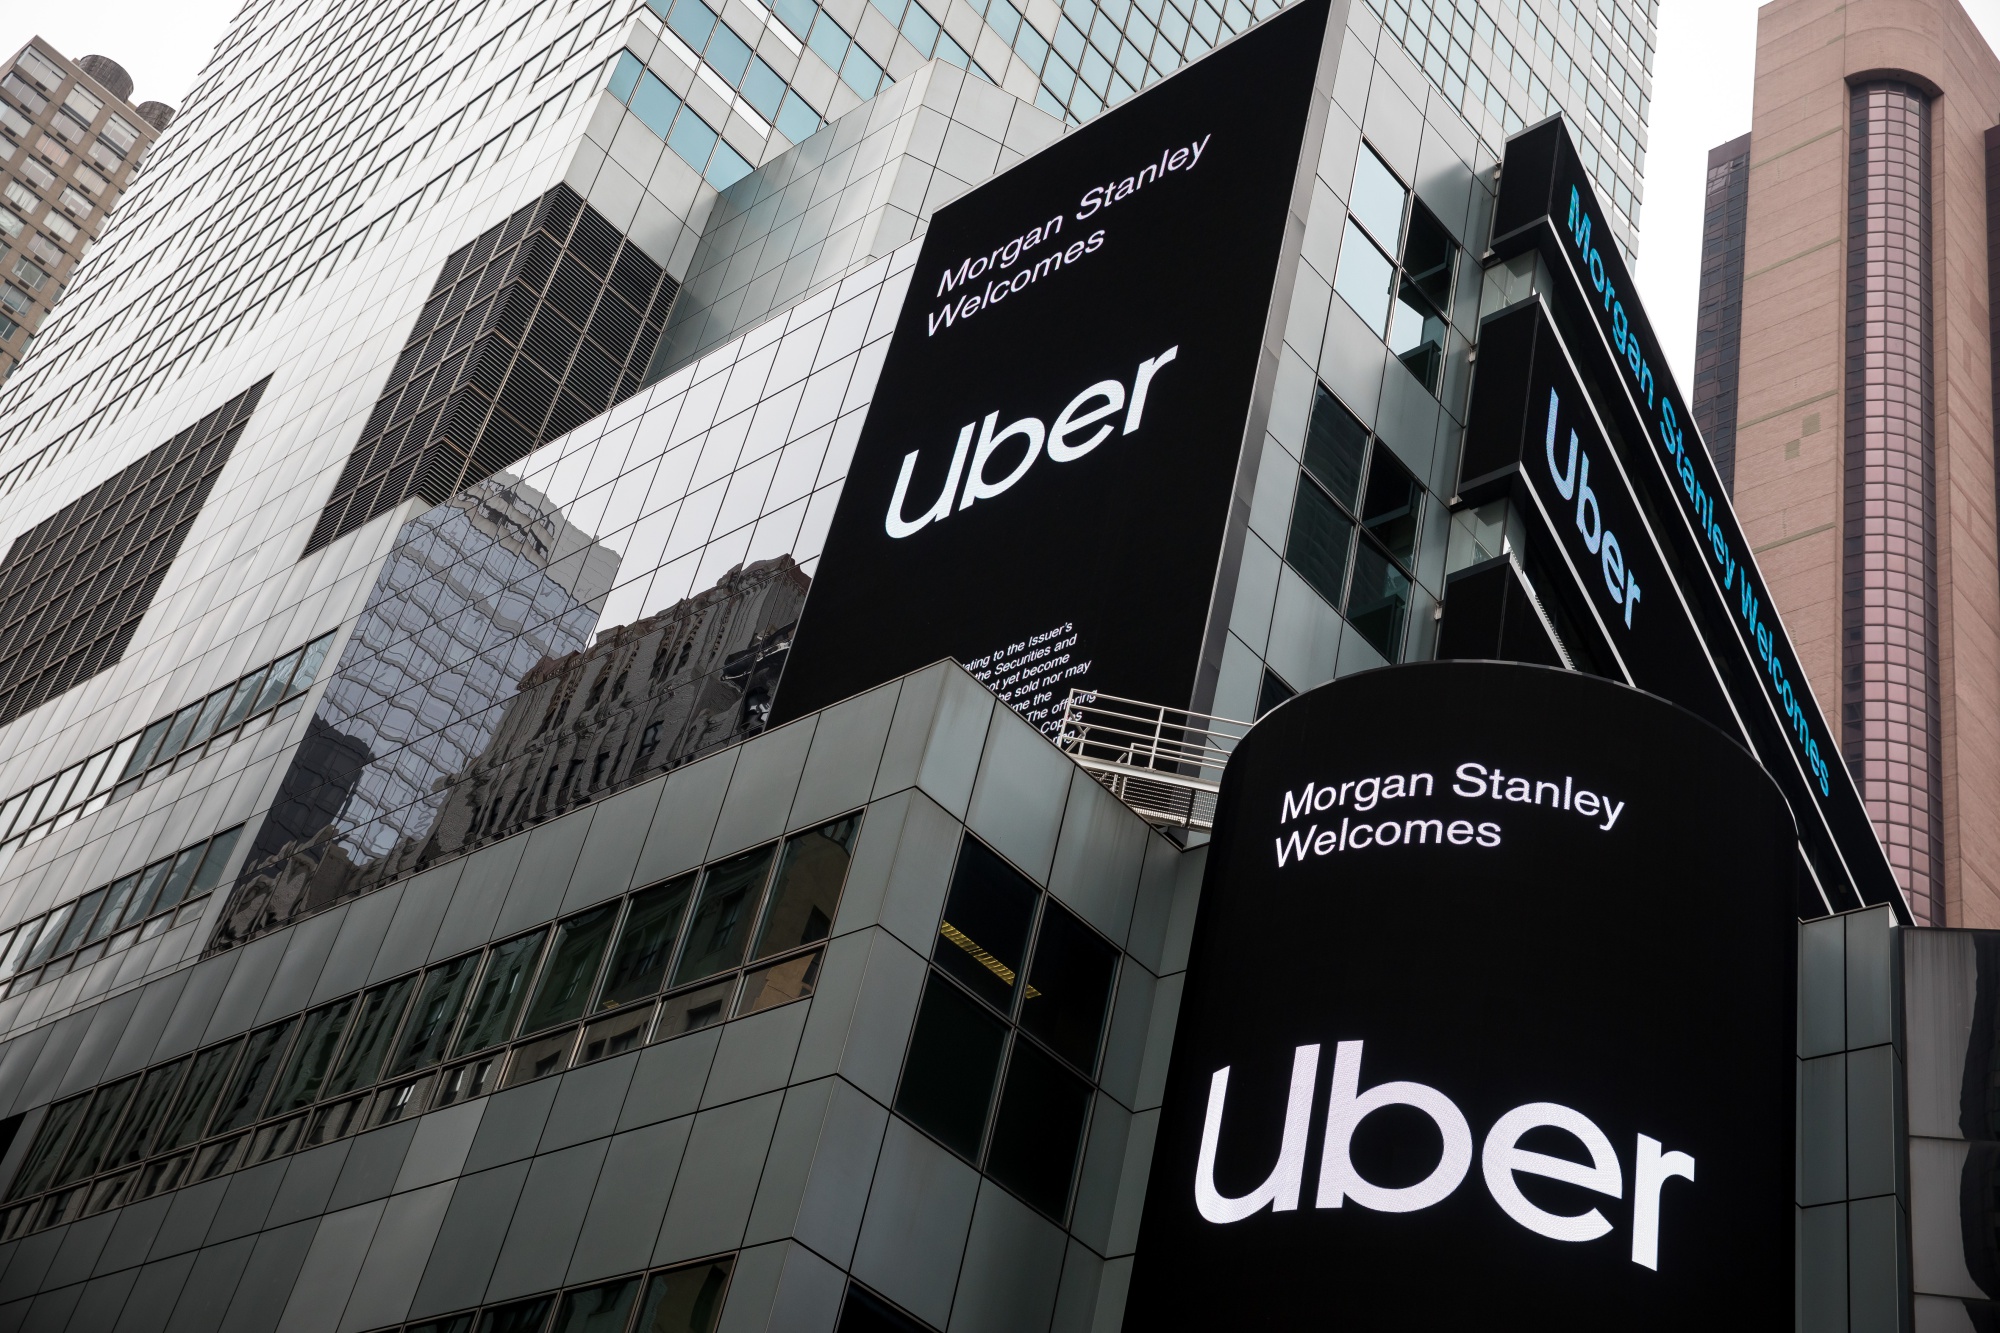 Monitors display Uber signage in front of Morgan Stanley headquarters in the Times Square area of New York.